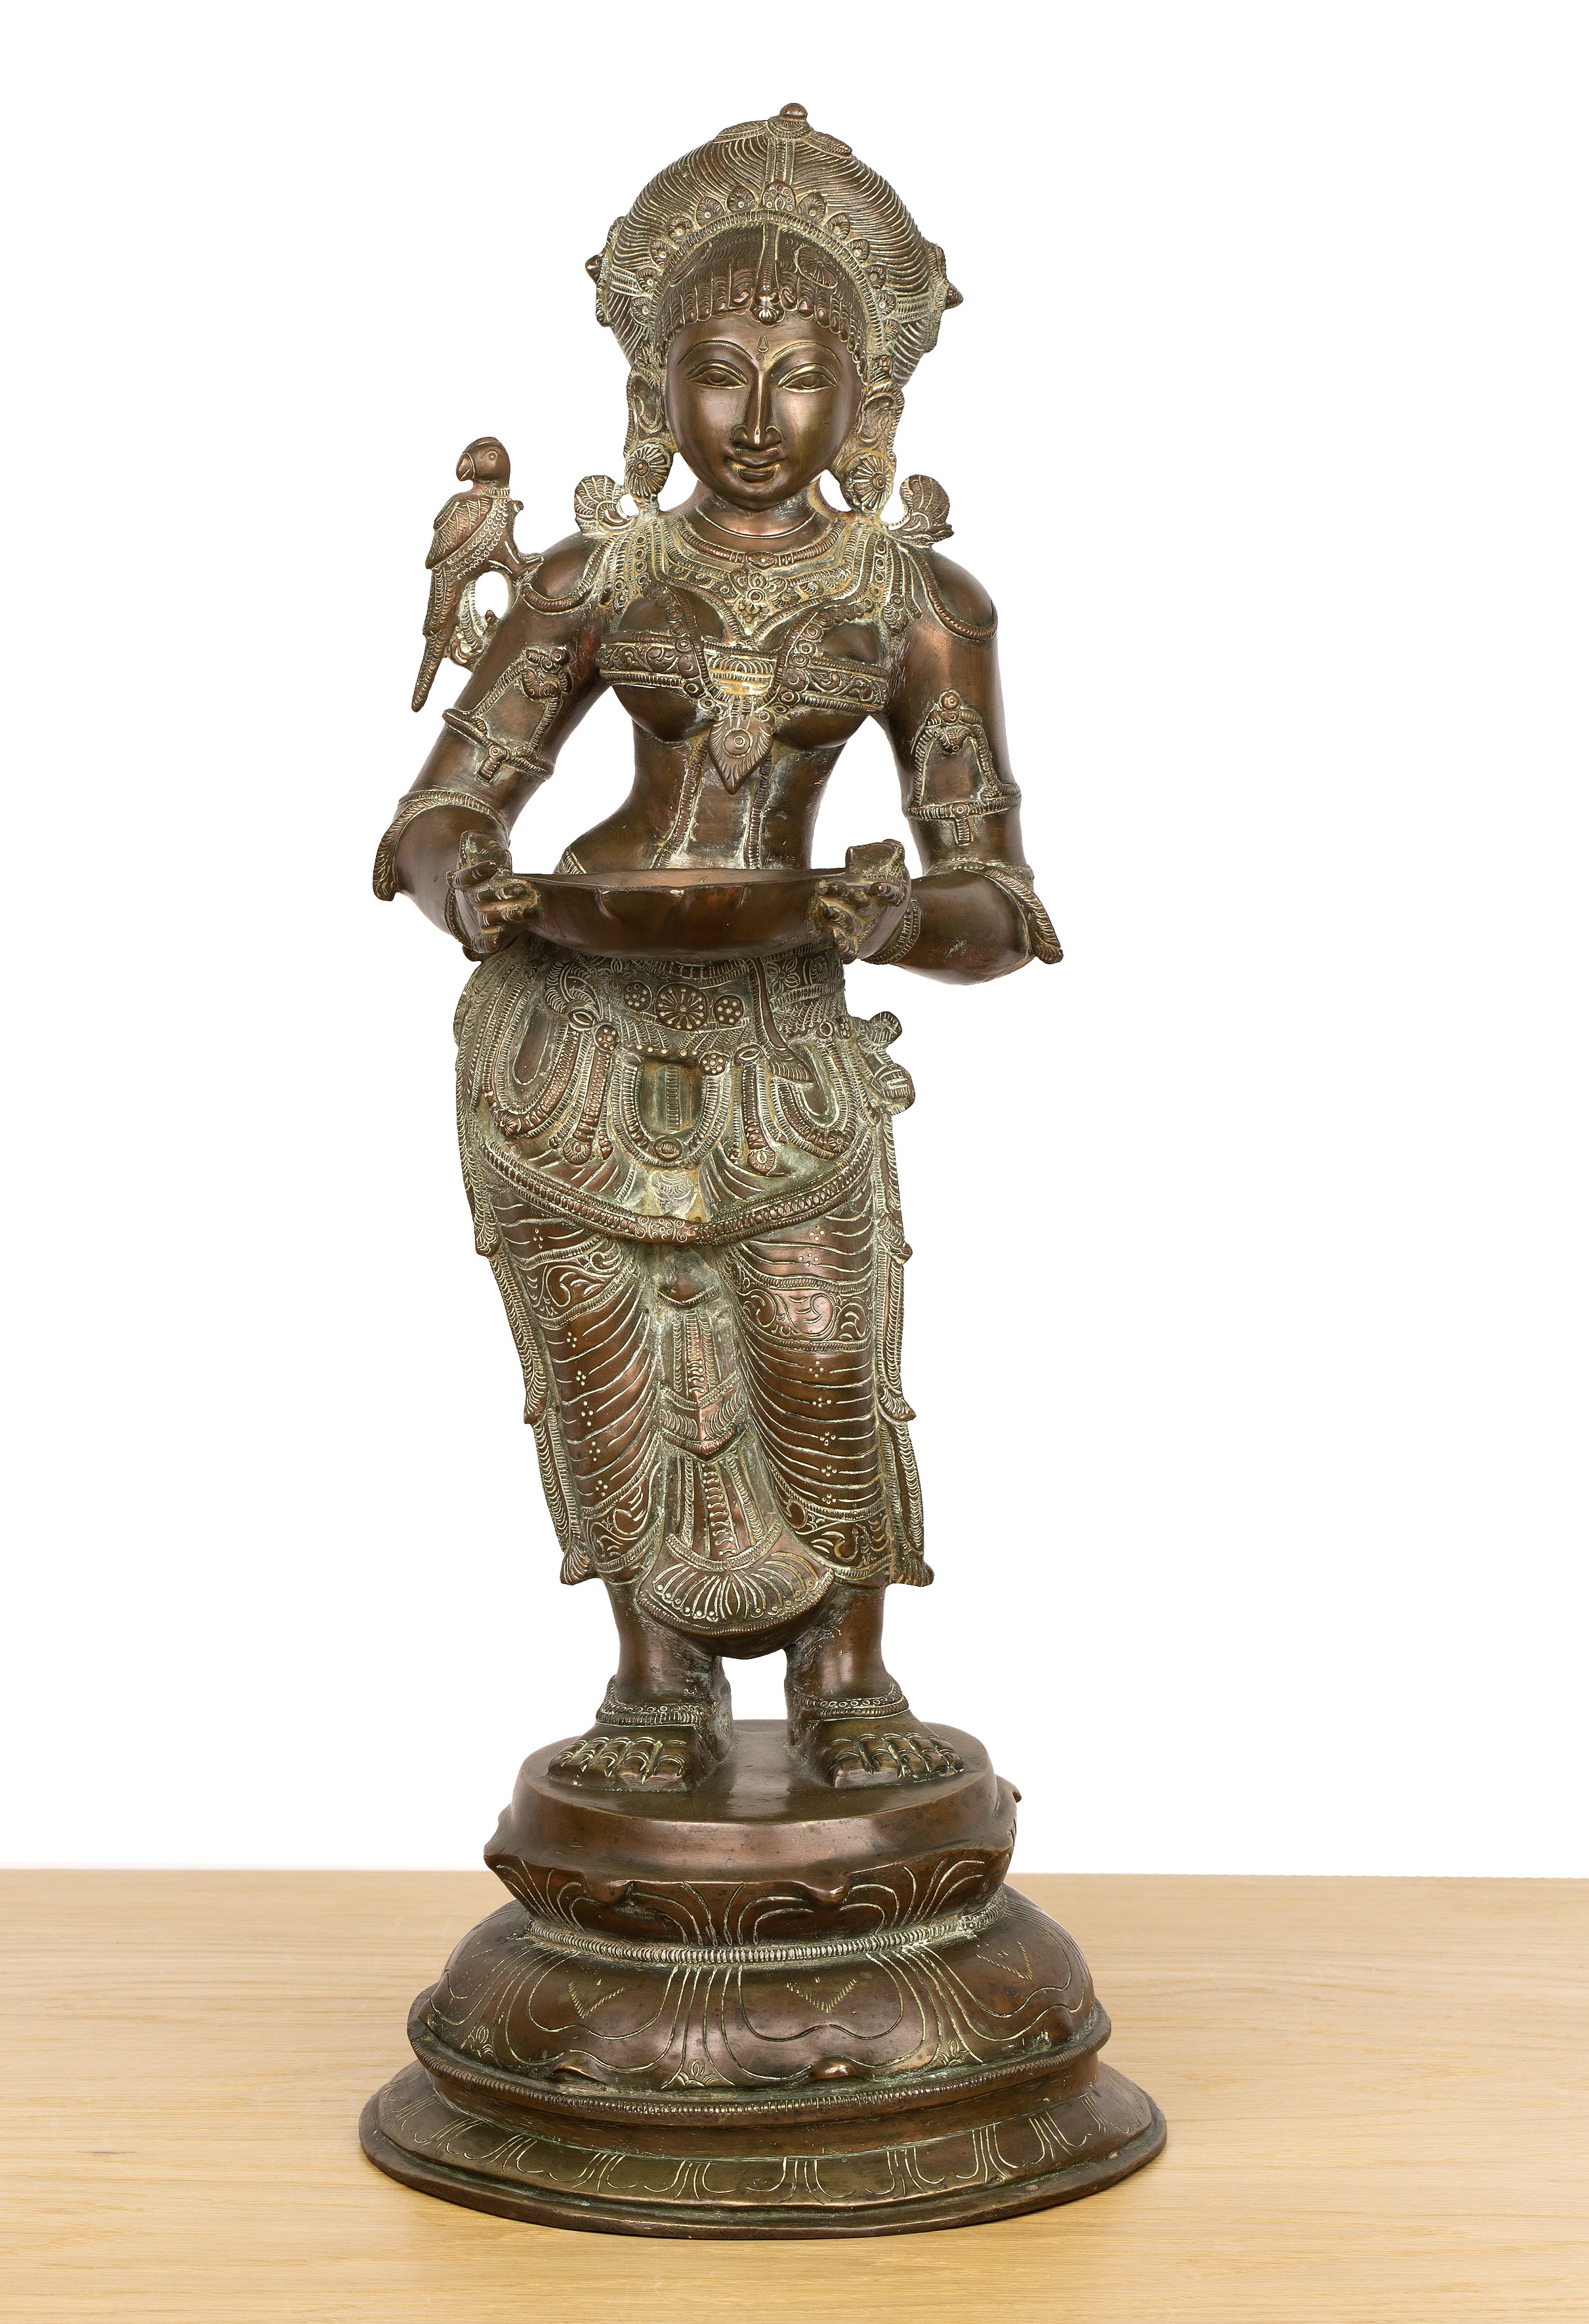 Bronze Lakshmi figure Indian with finely engraved decorated throughout, the goddess holds a dish